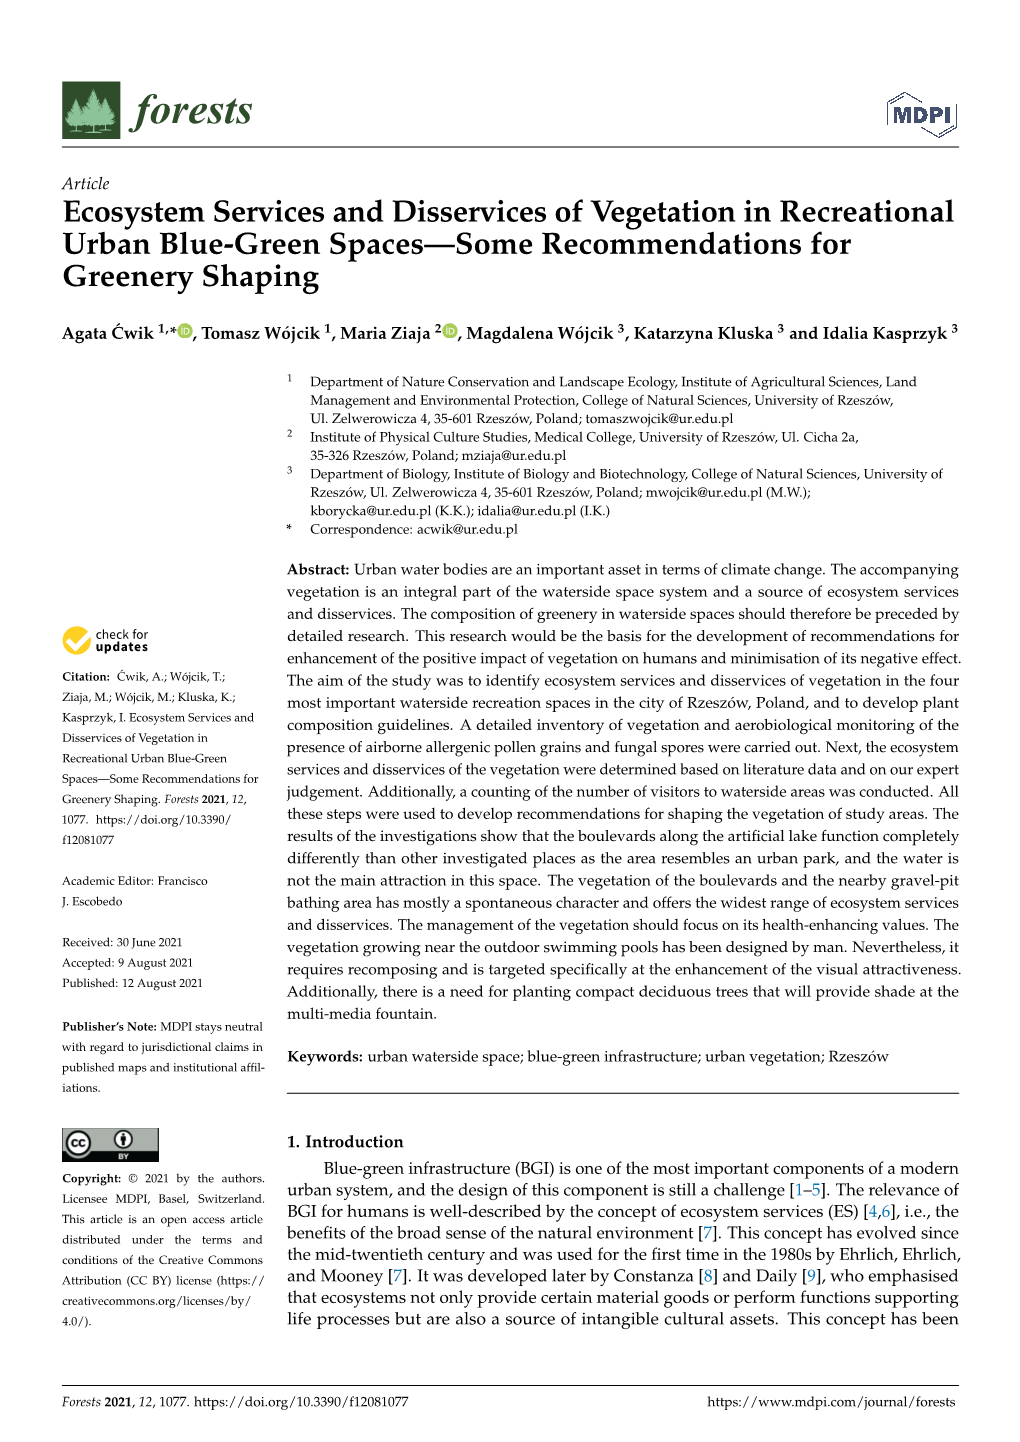 Ecosystem Services and Disservices of Vegetation in Recreational Urban Blue-Green Spaces—Some Recommendations for Greenery Shaping